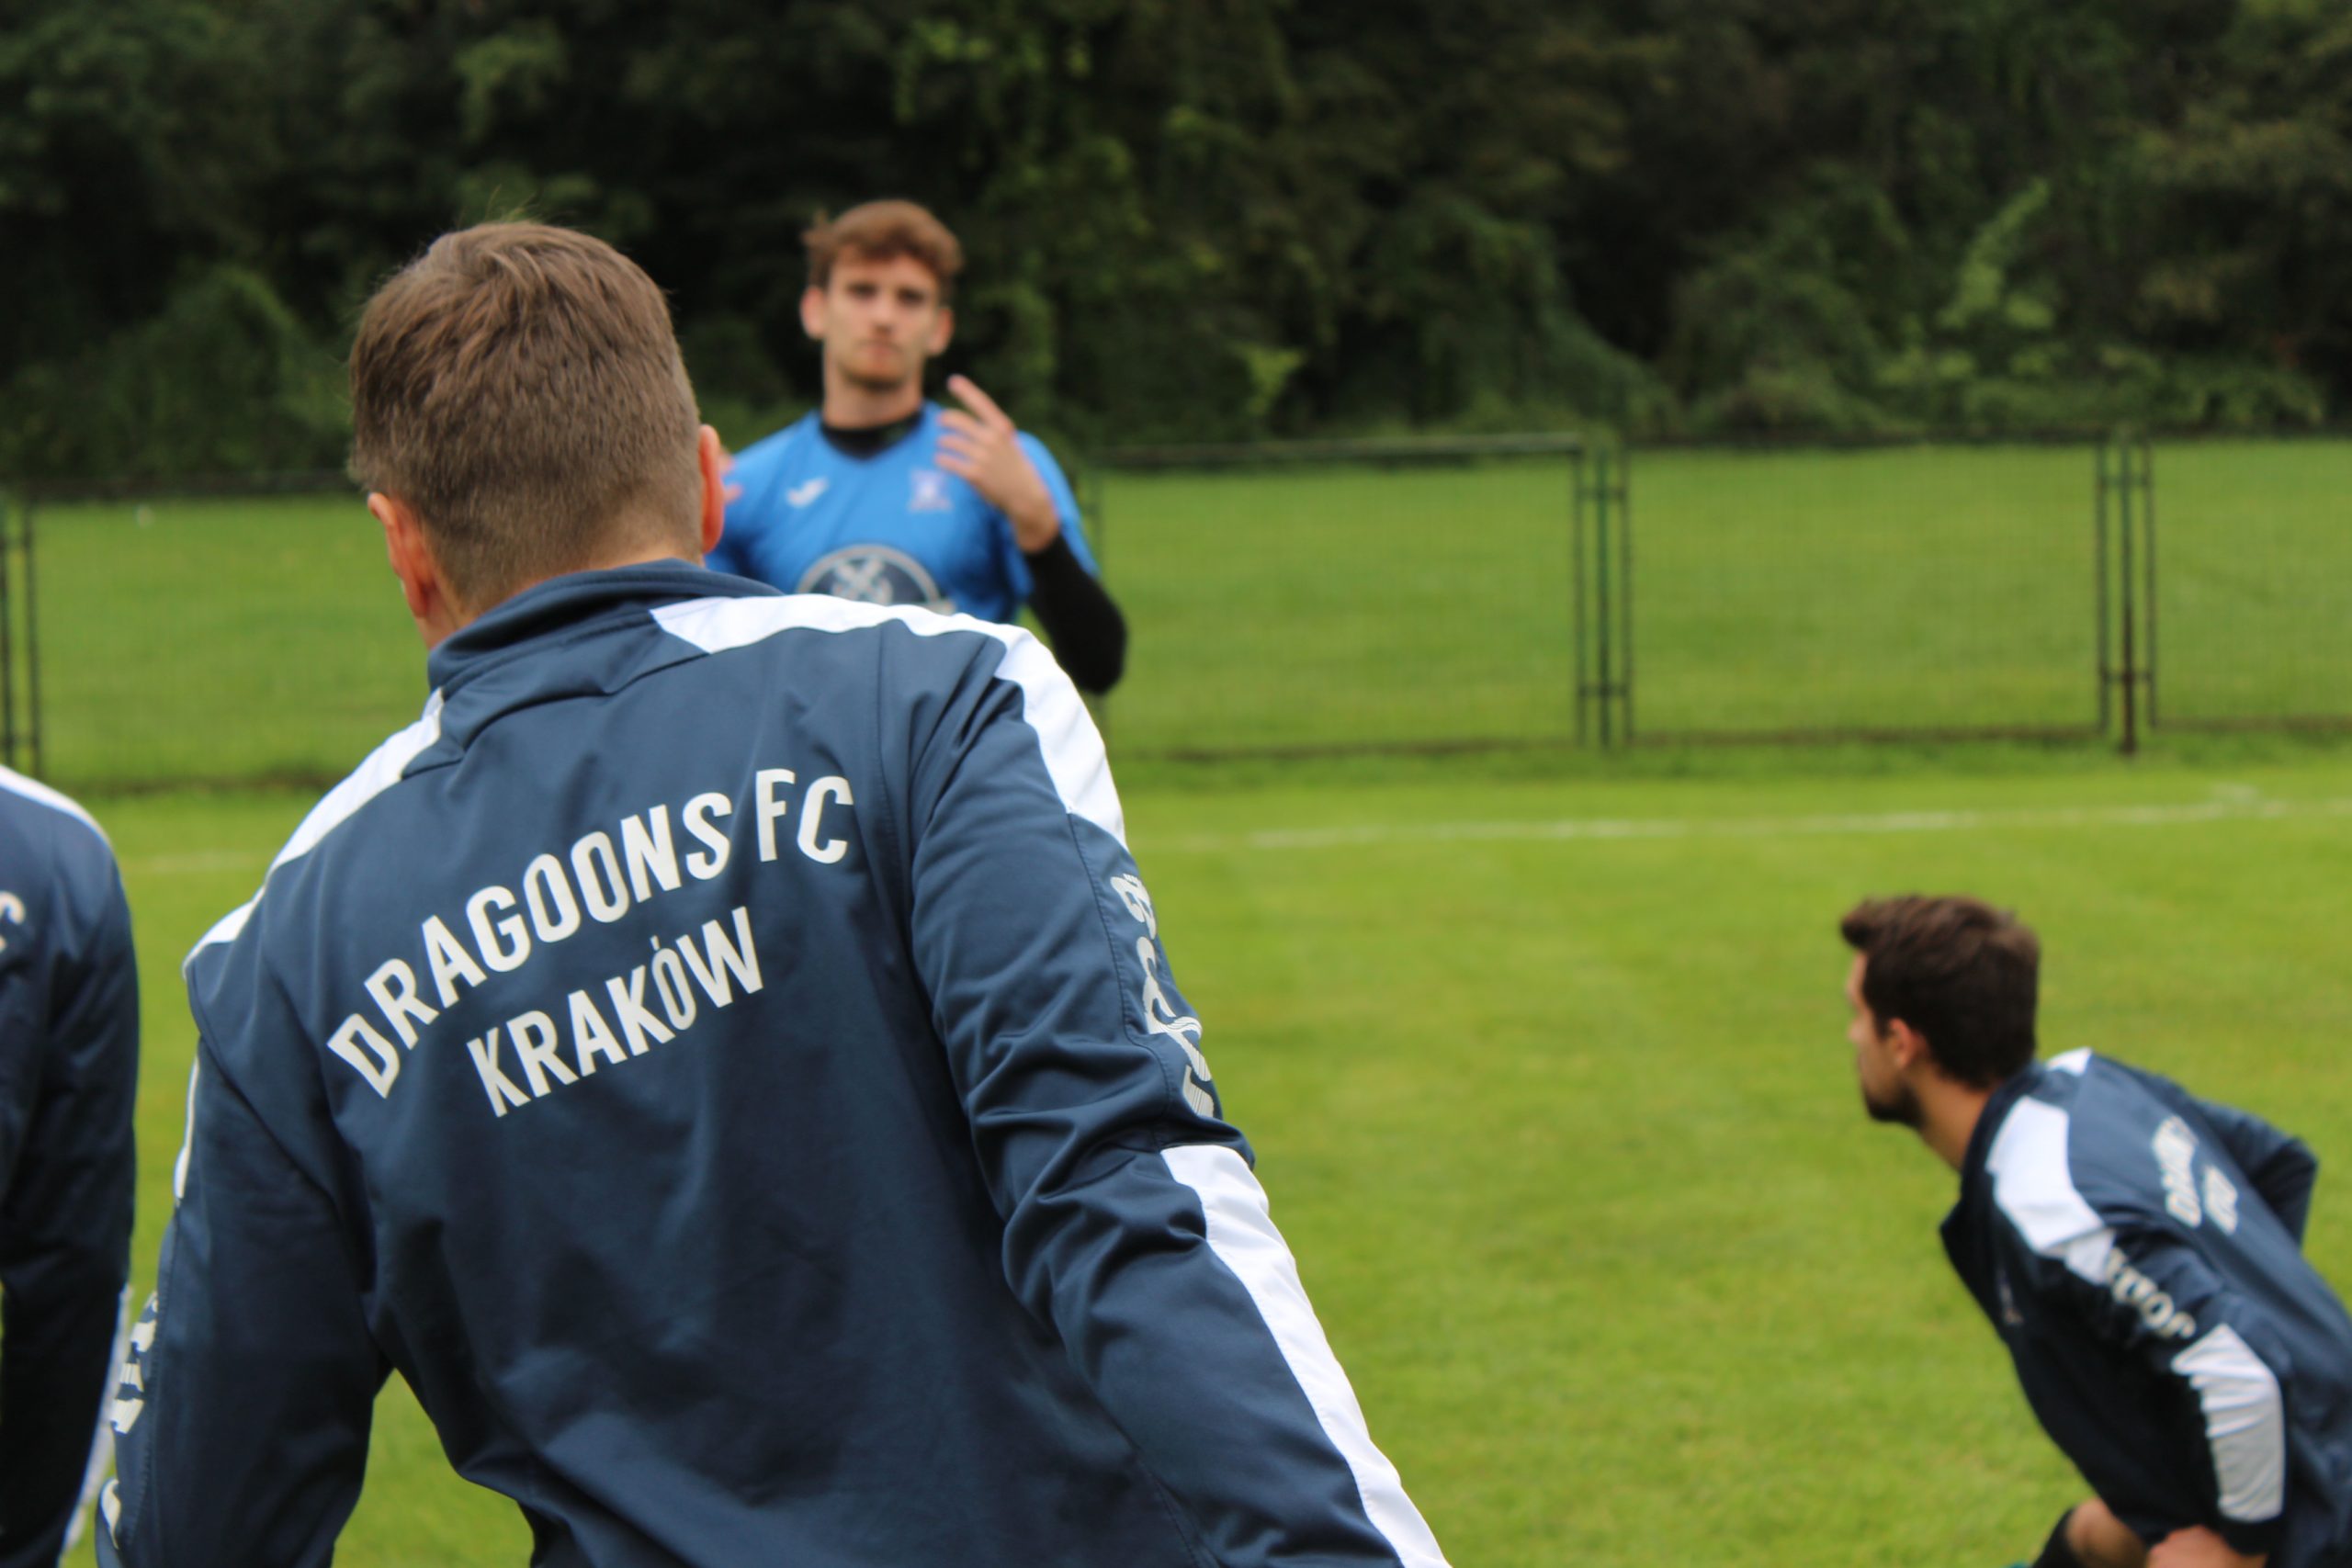 Krakow Dragoons FC warming up before match